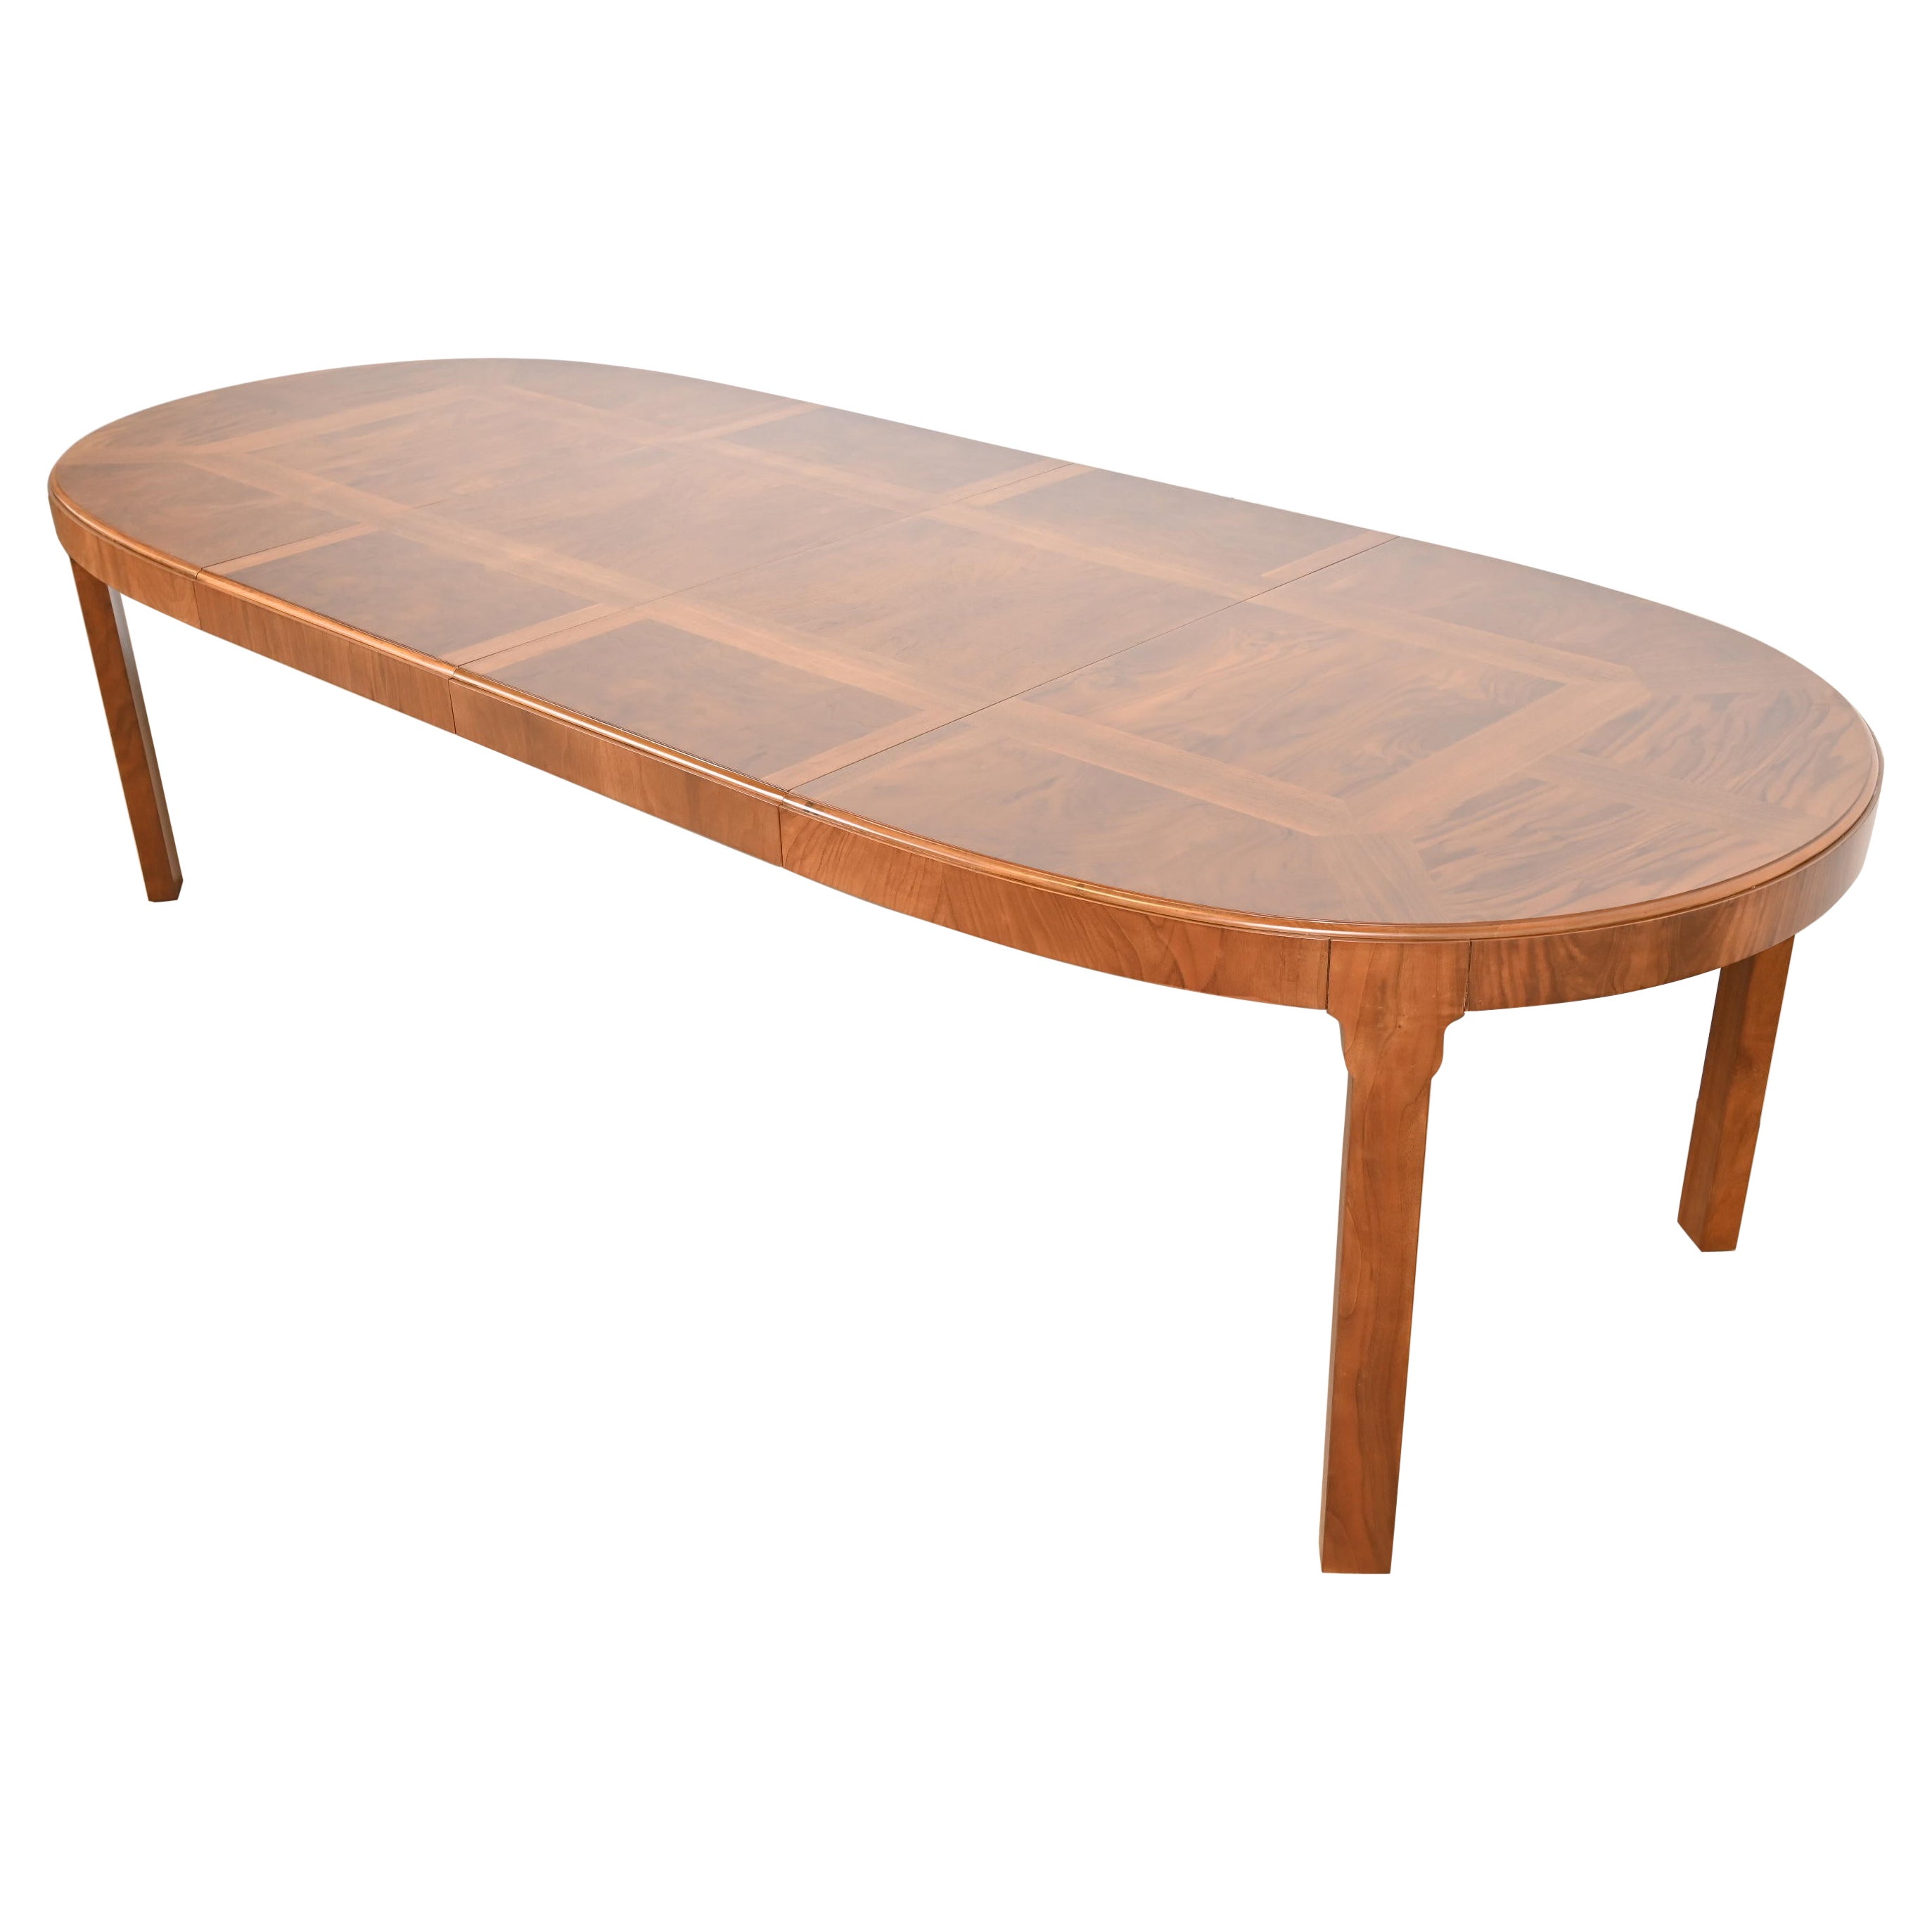 Drexel Heritage Mid-Century Modern Inlaid Burled Walnut Parquetry Dining Table For Sale